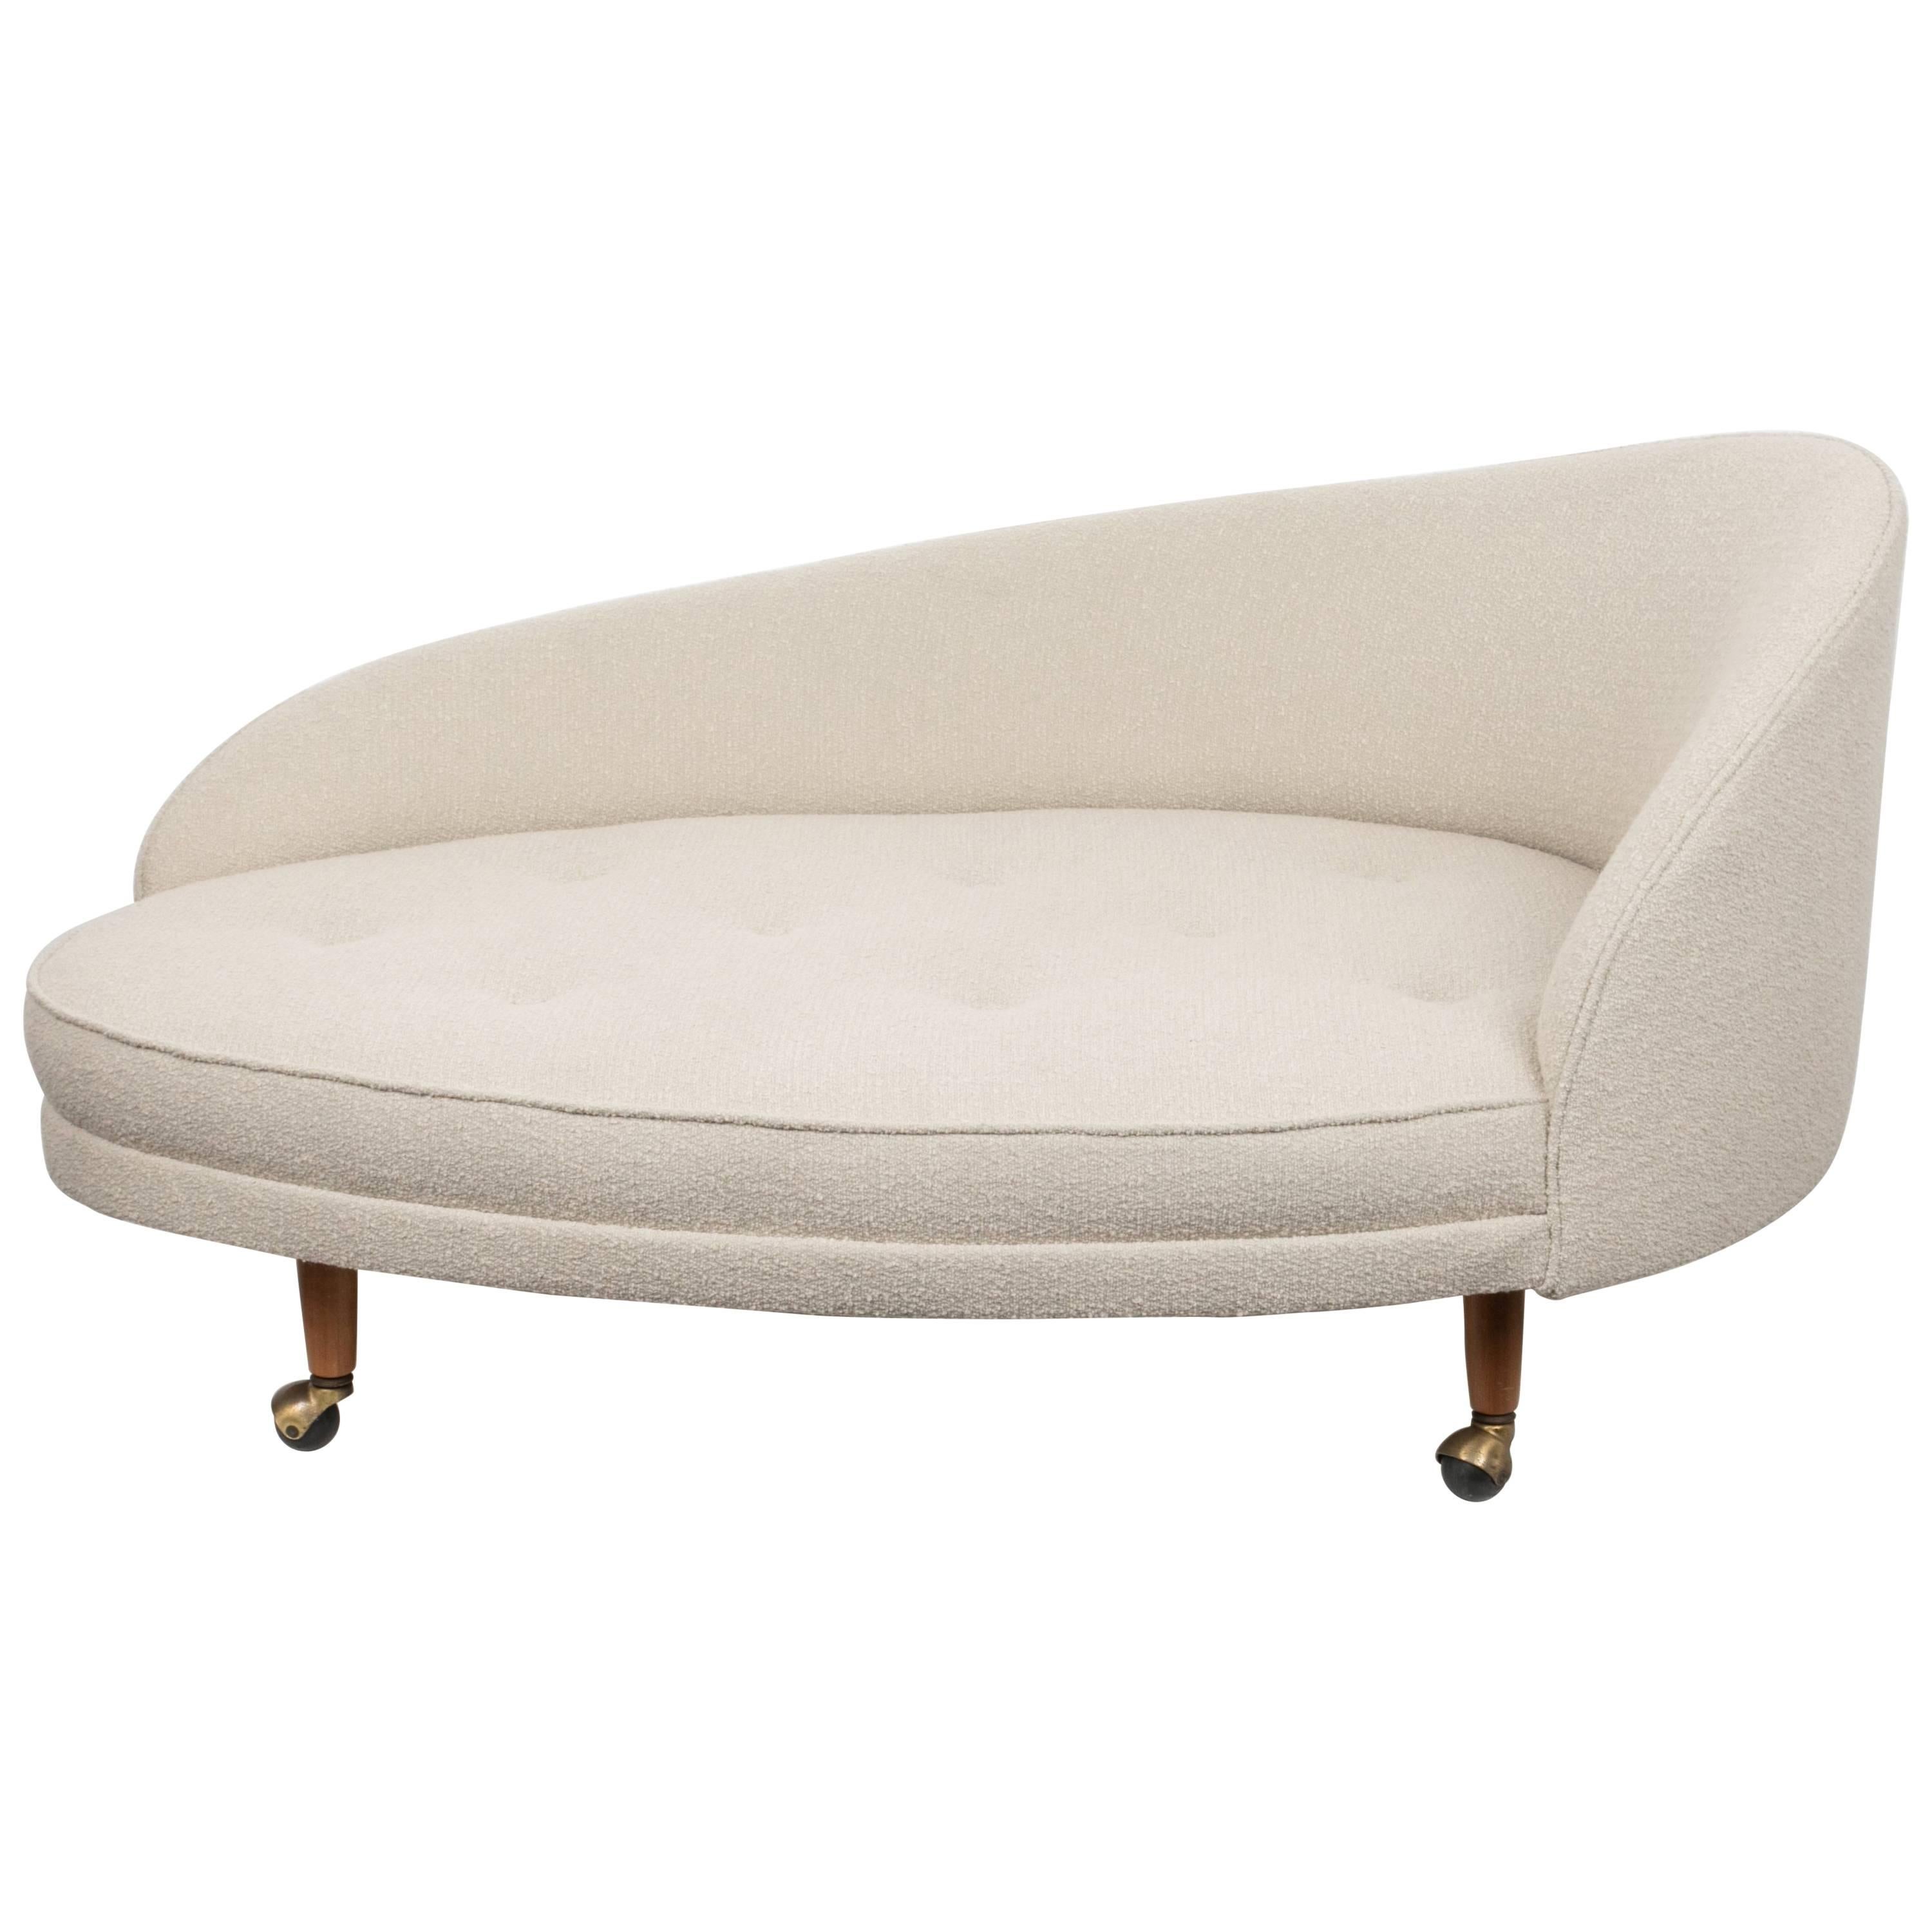 Adrian Pearsall 2026CL Chaise Longue for Craft Associates